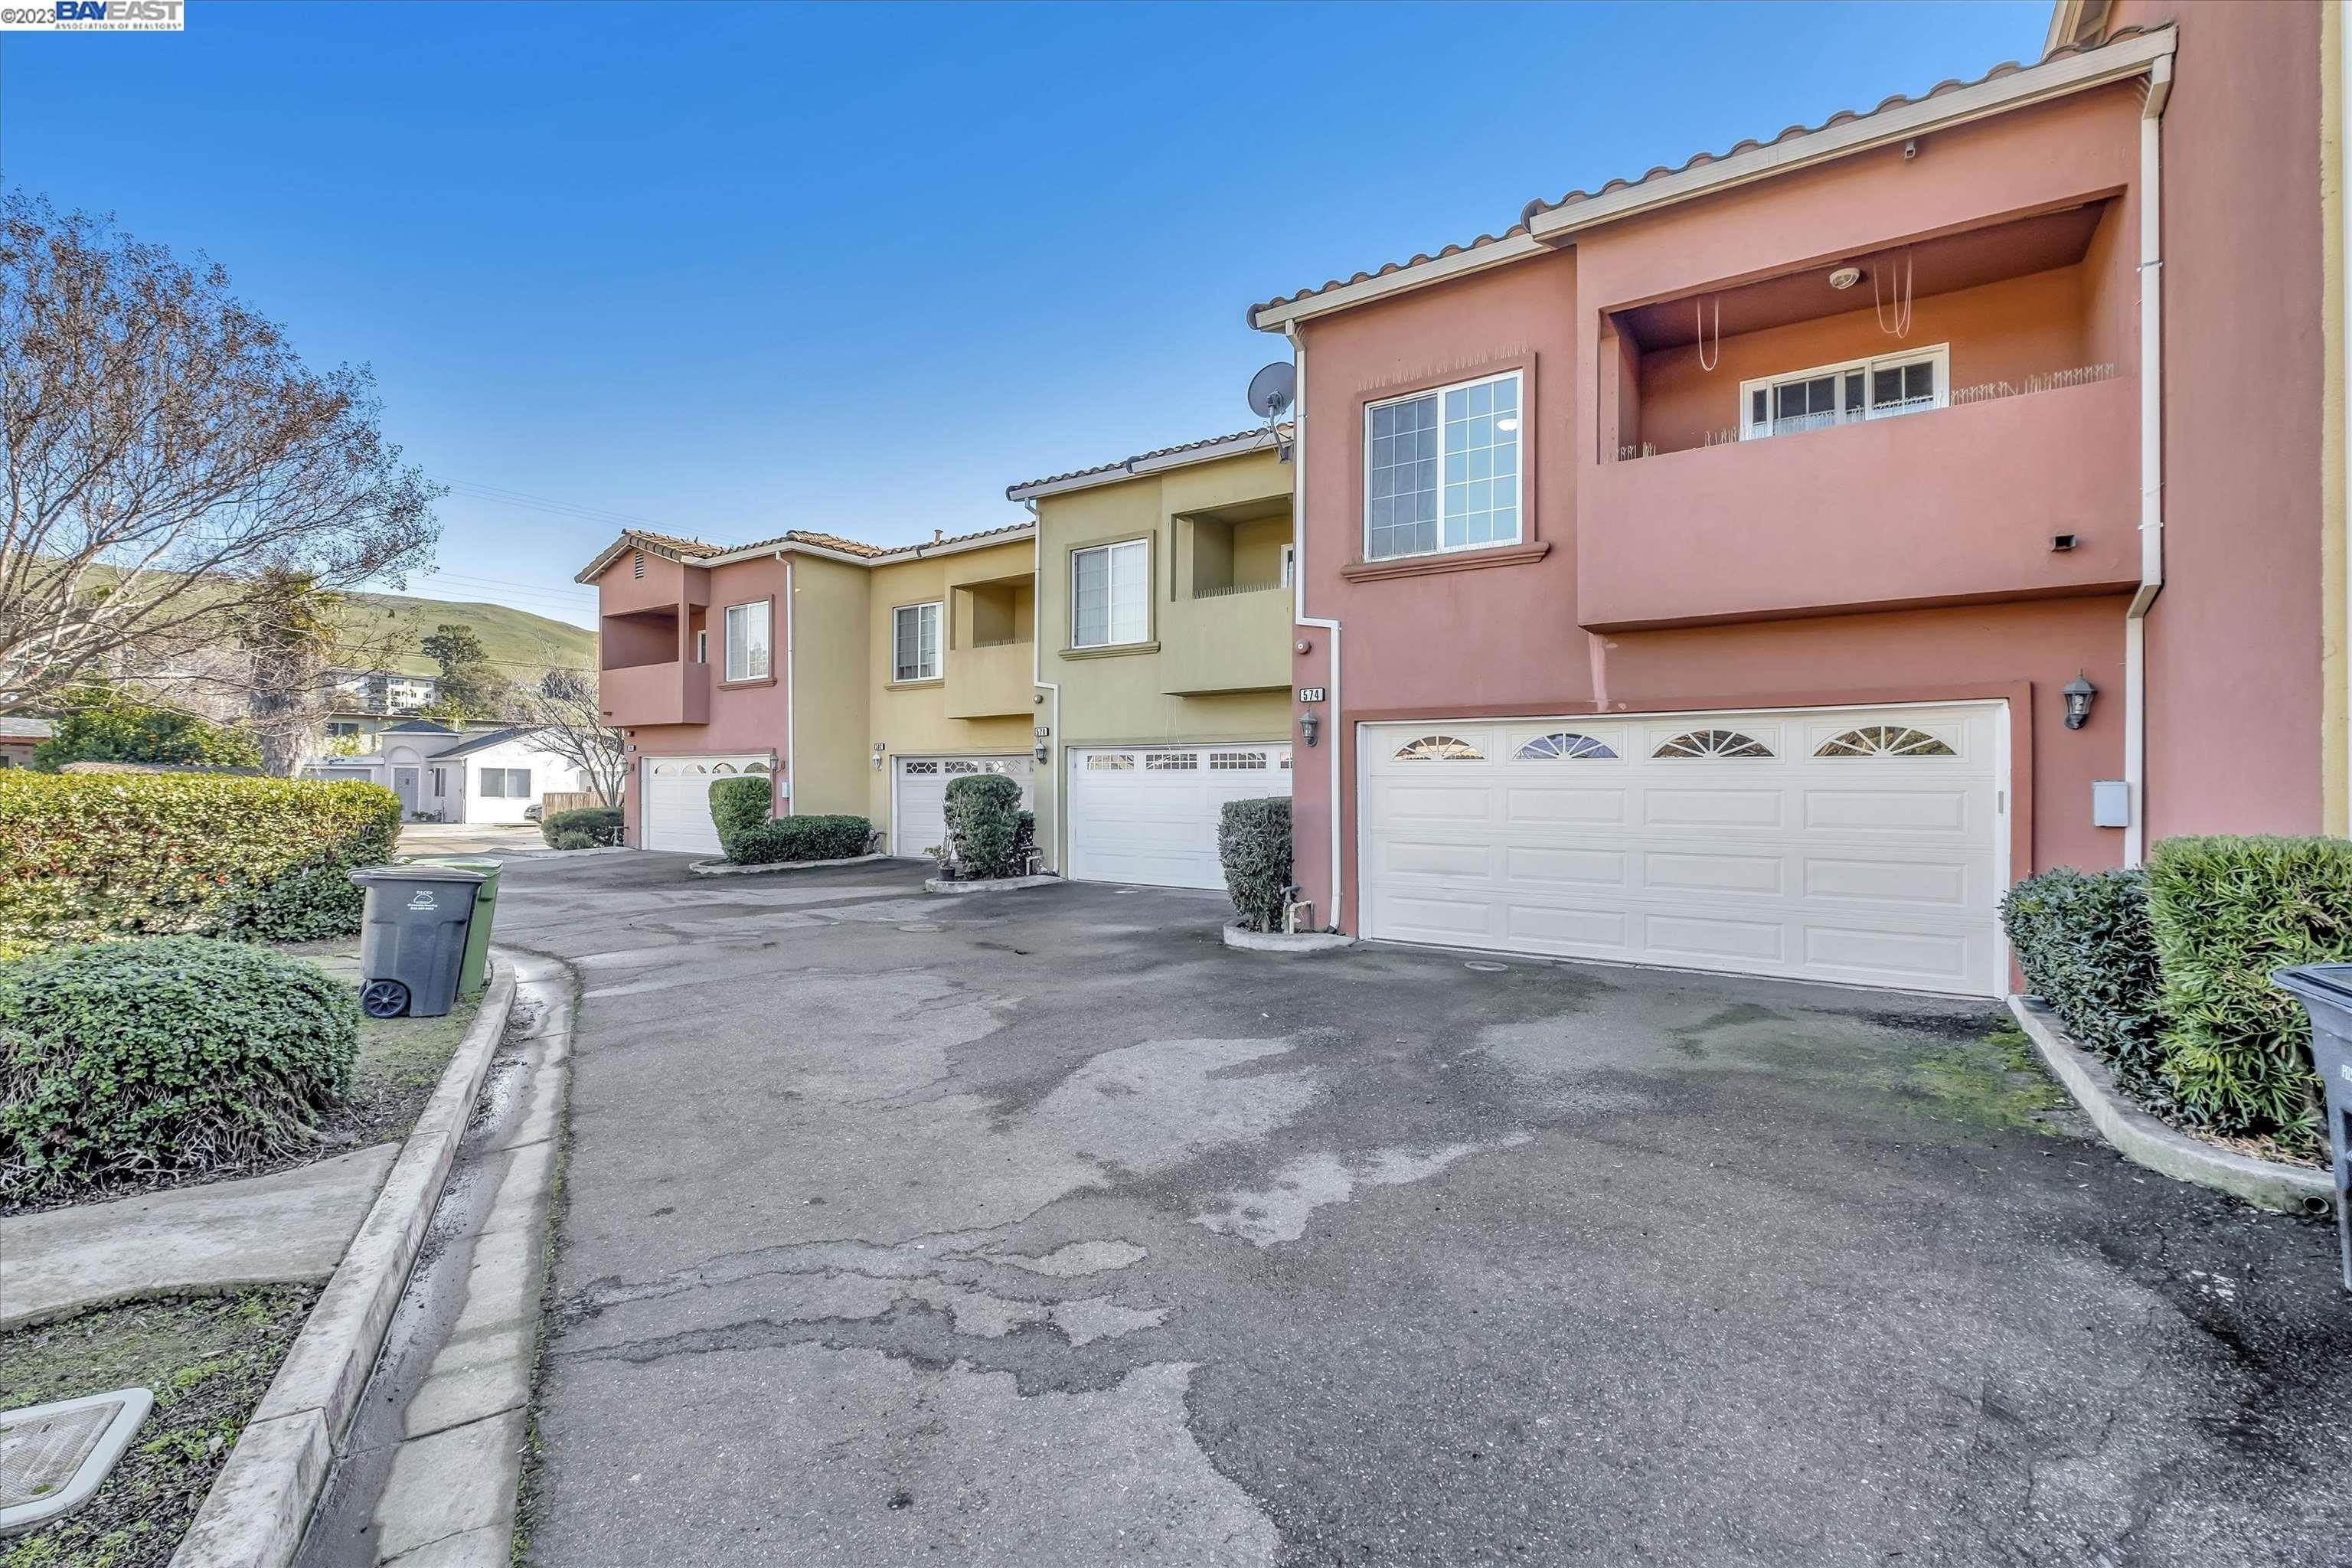 26. Townhouse for Sale at Hayward, CA 94544